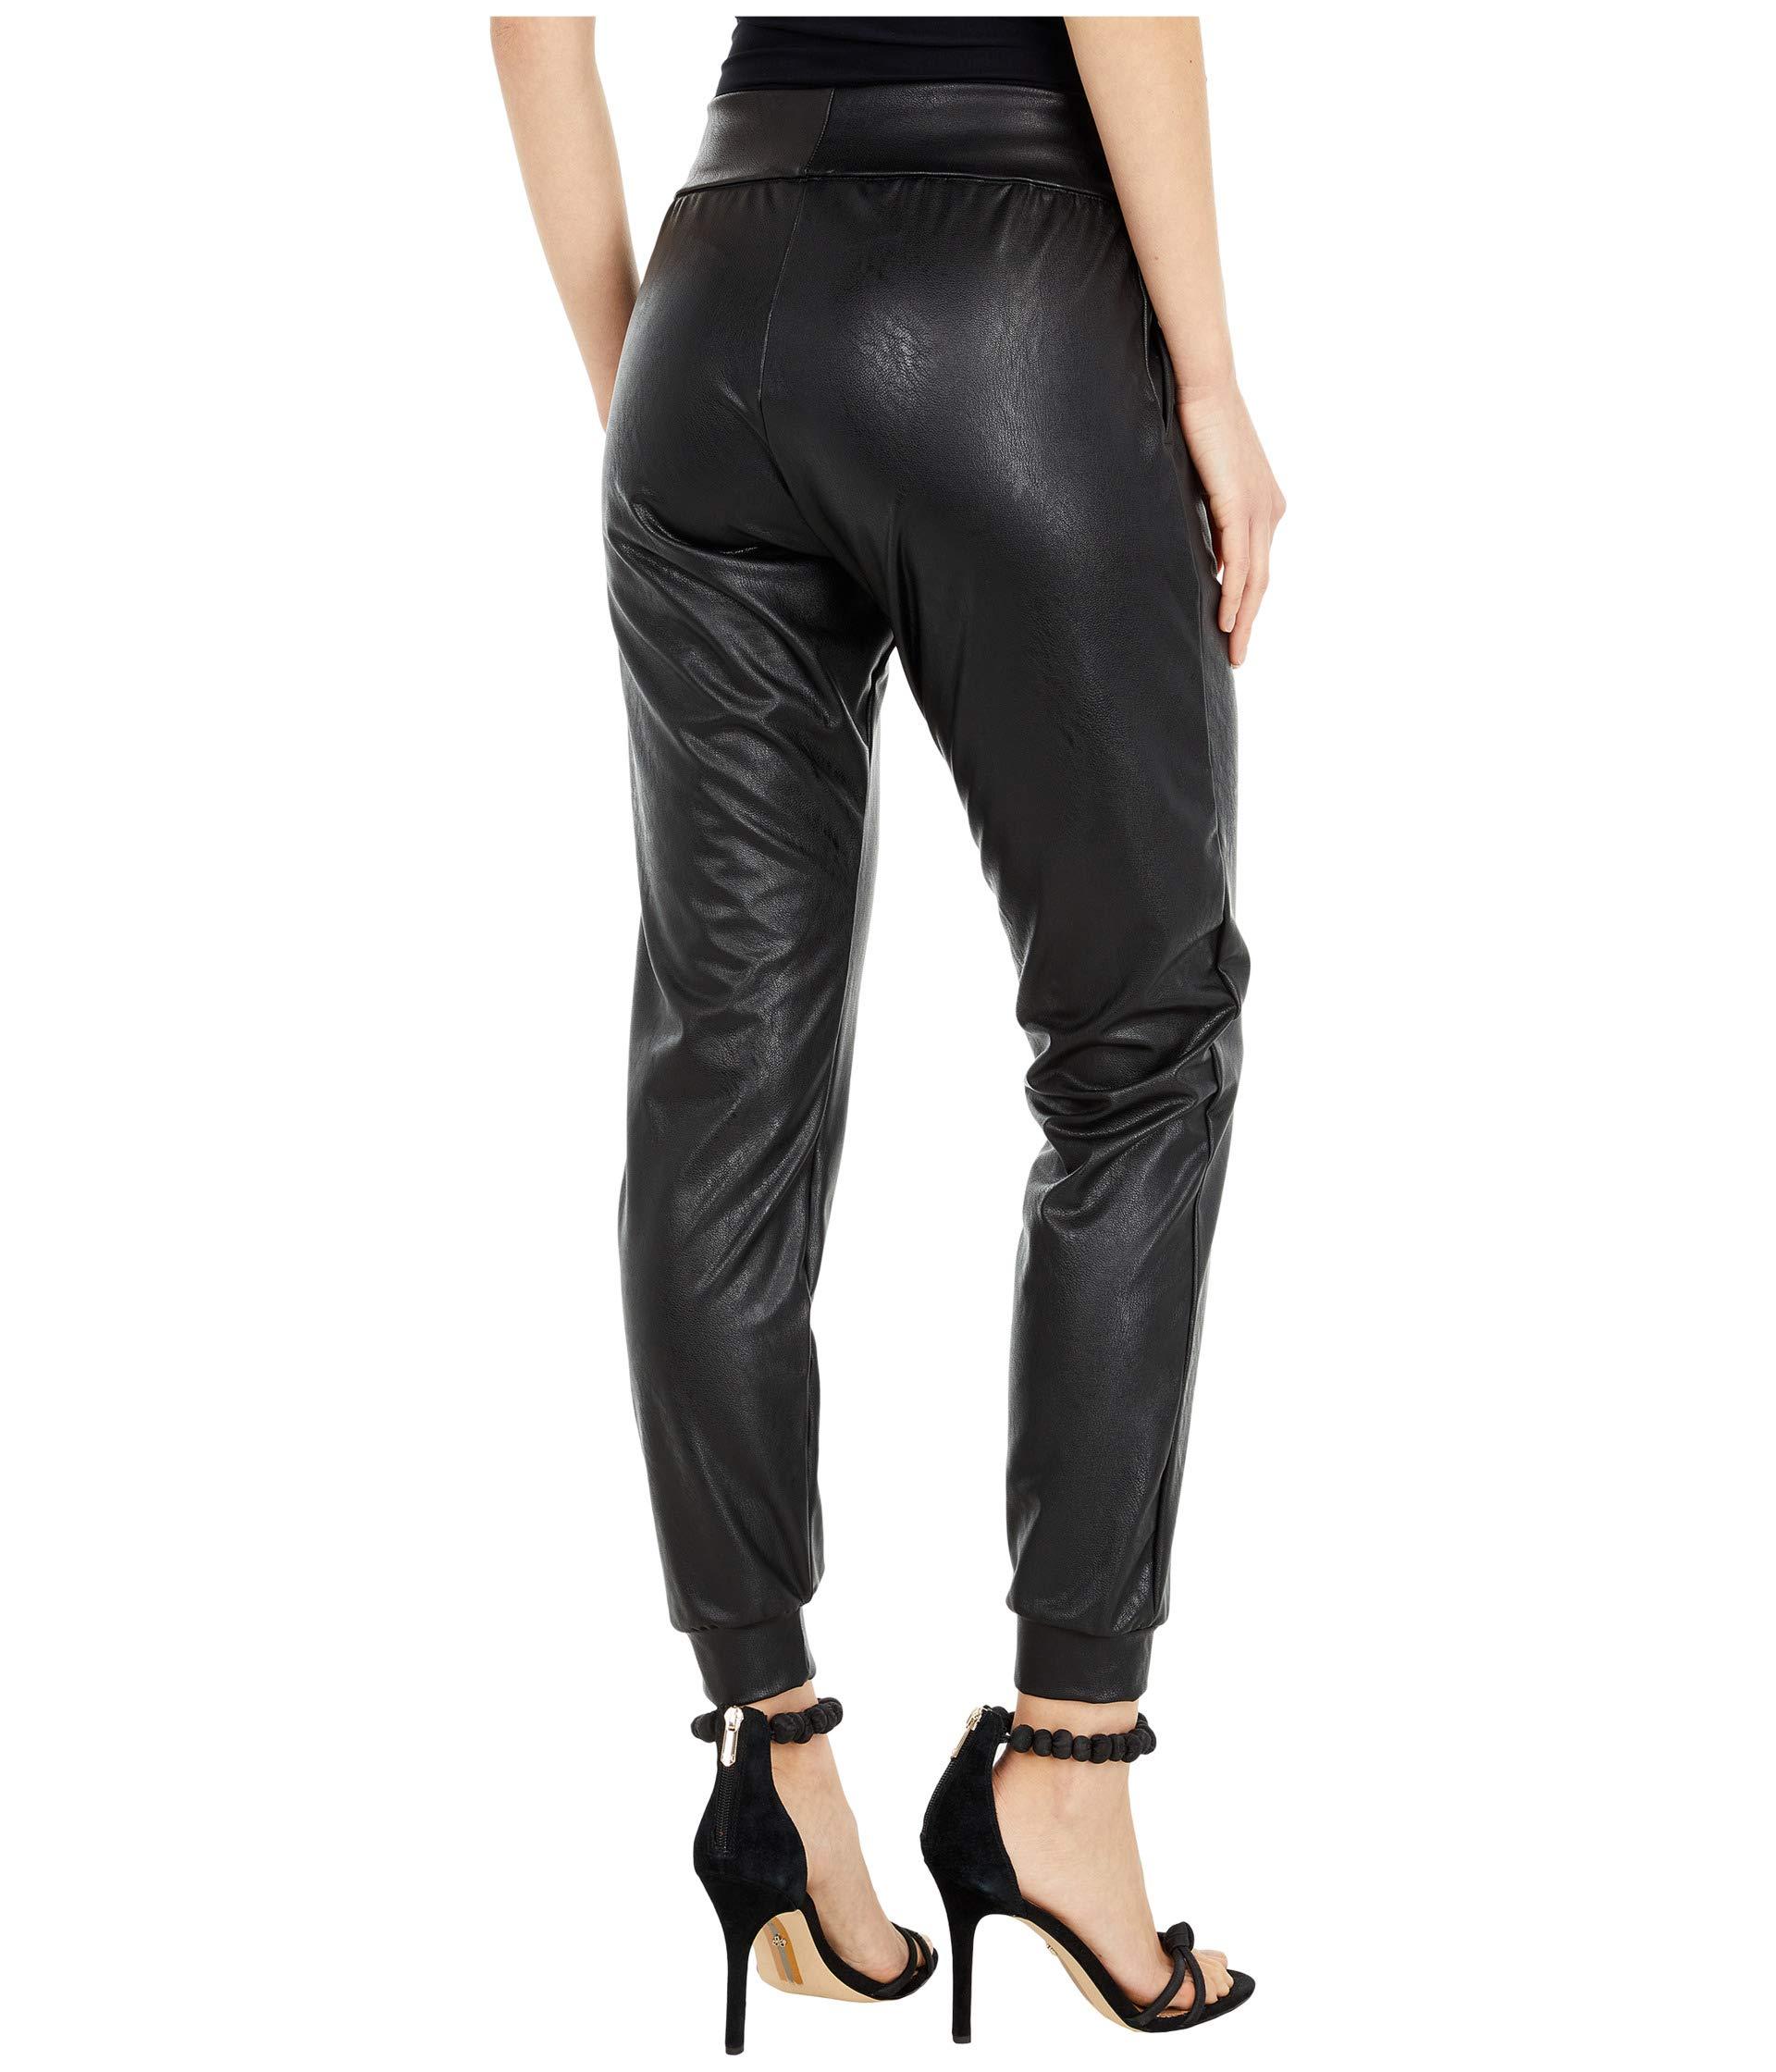 Commando Faux Leather Joggers Slg45 in Black - Lyst